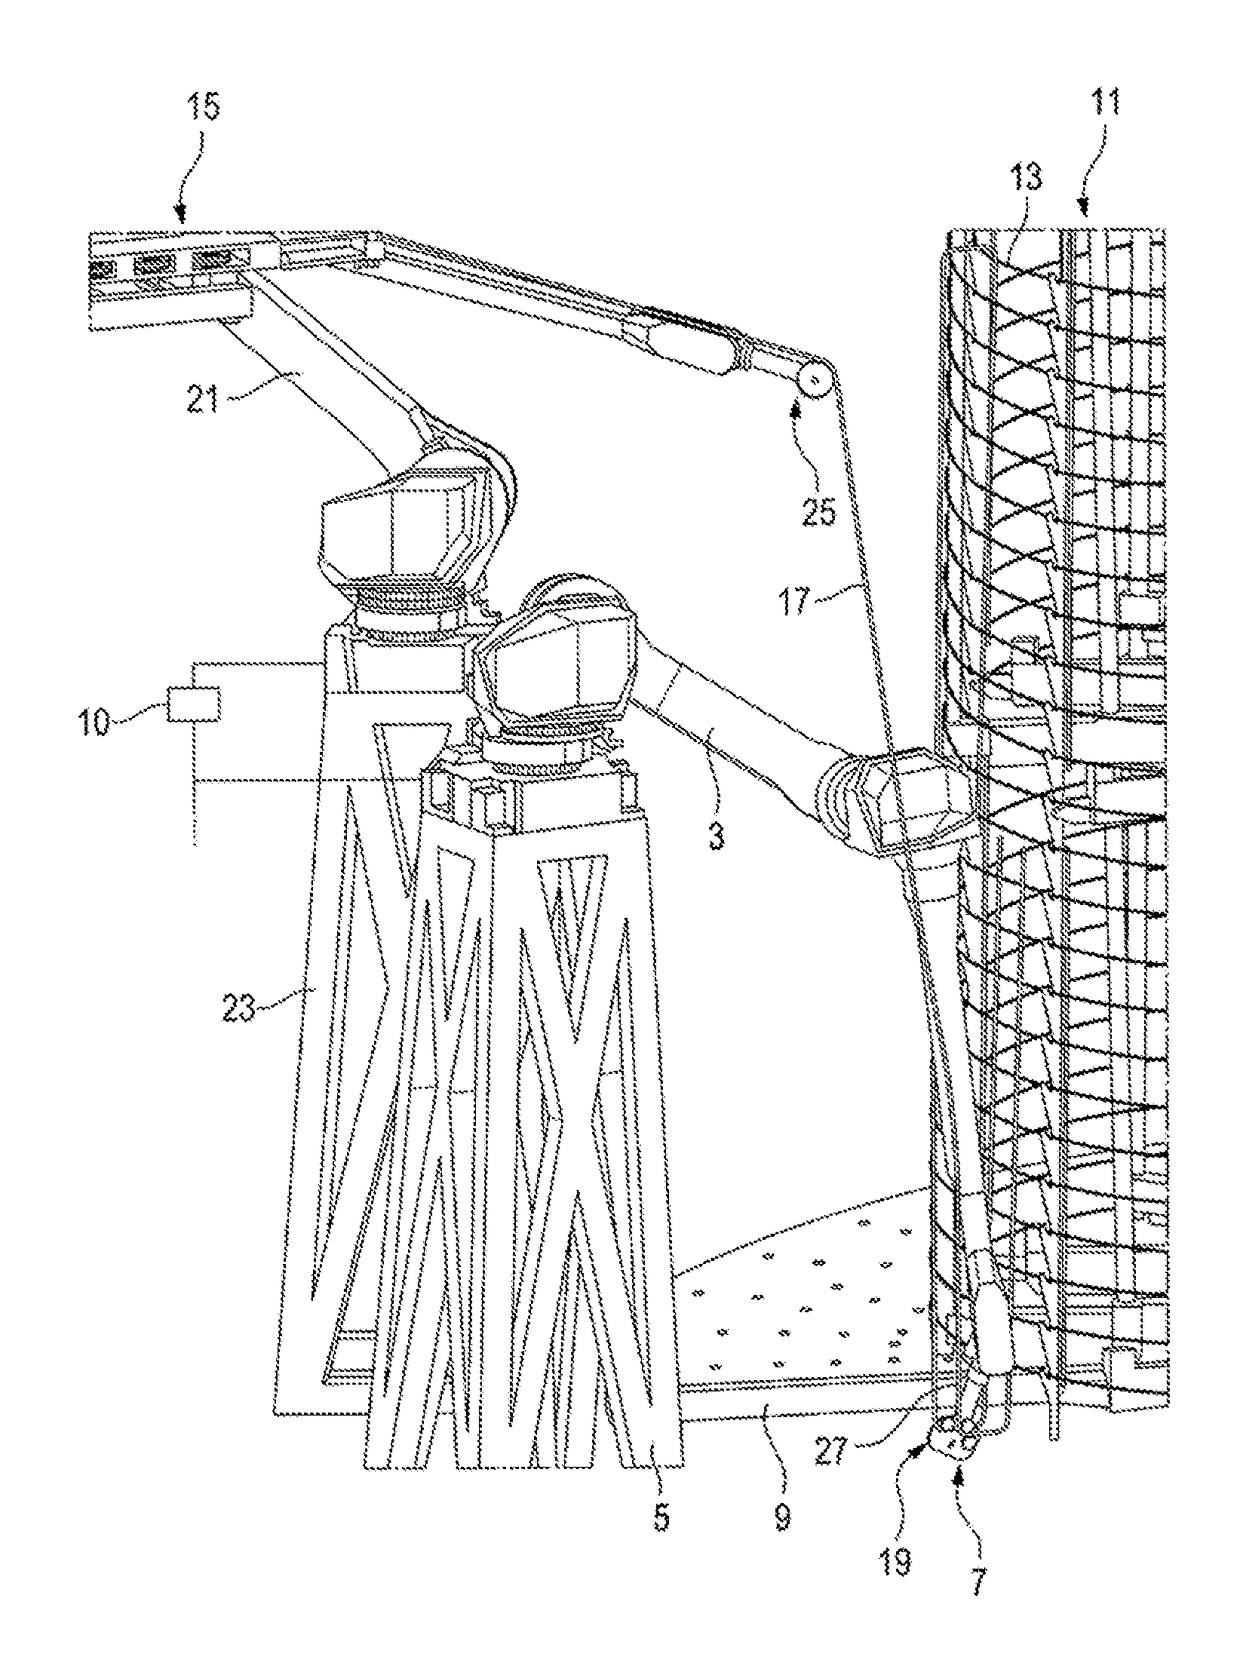 Installation for producing reinforcement cages for tower segments of wind turbines